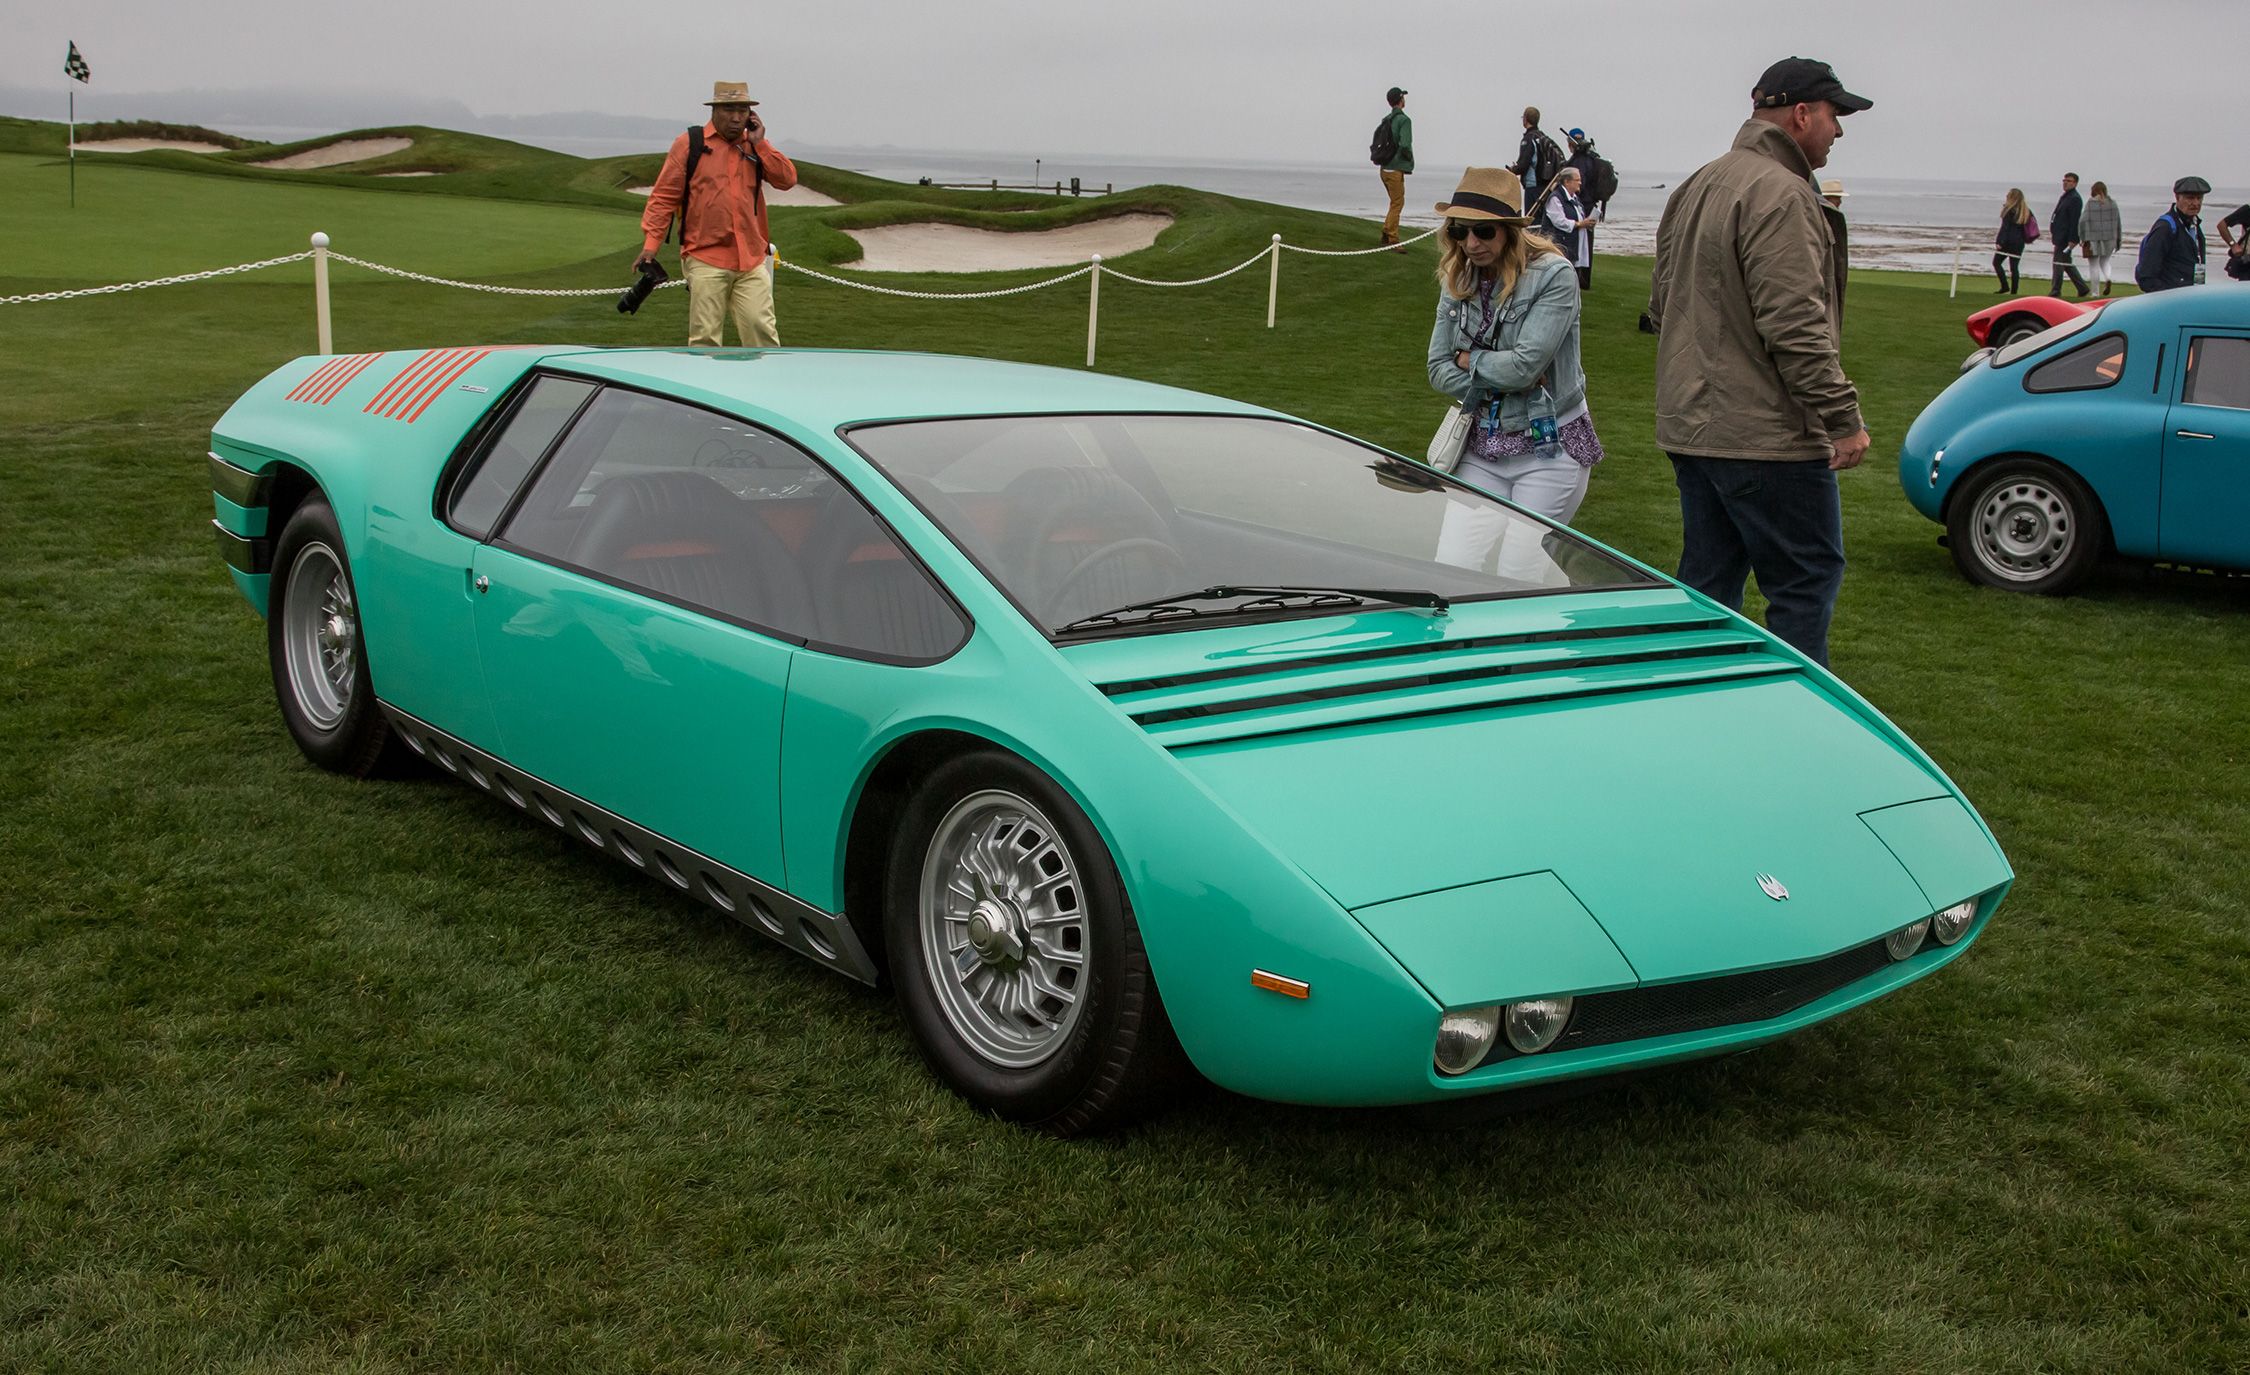 Our Favorites from the 2016 Pebble Beach Concours d'Elegance